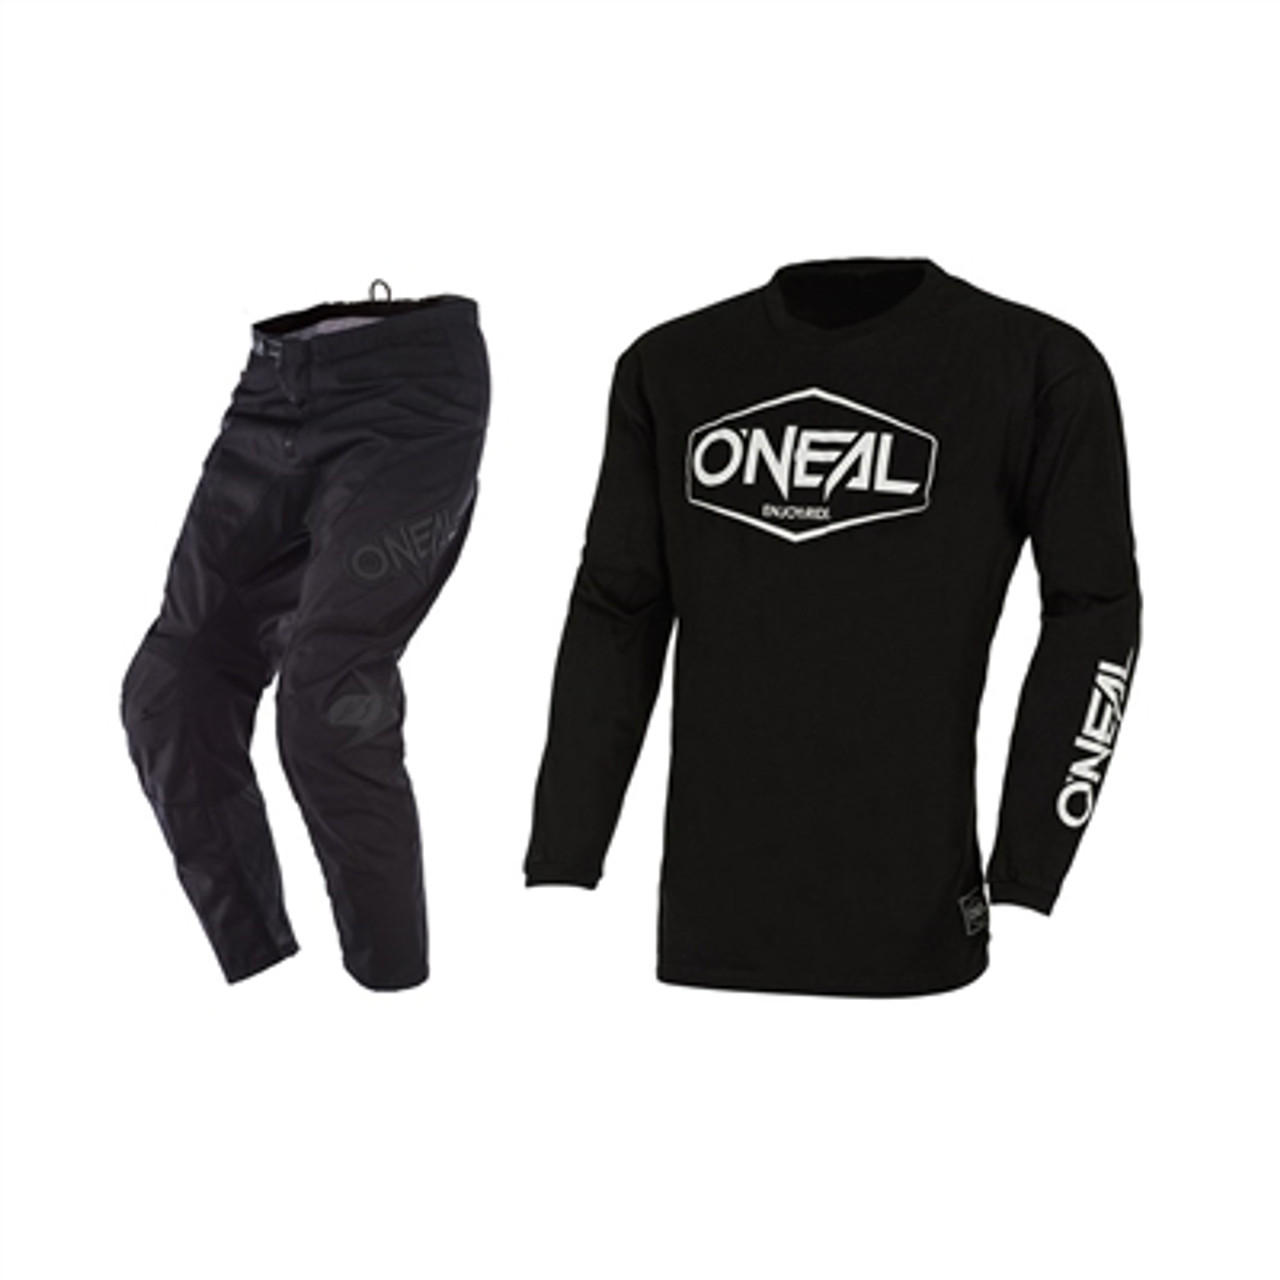 Oneal Element Hexx Cotton Classic Jersey Pant Combo